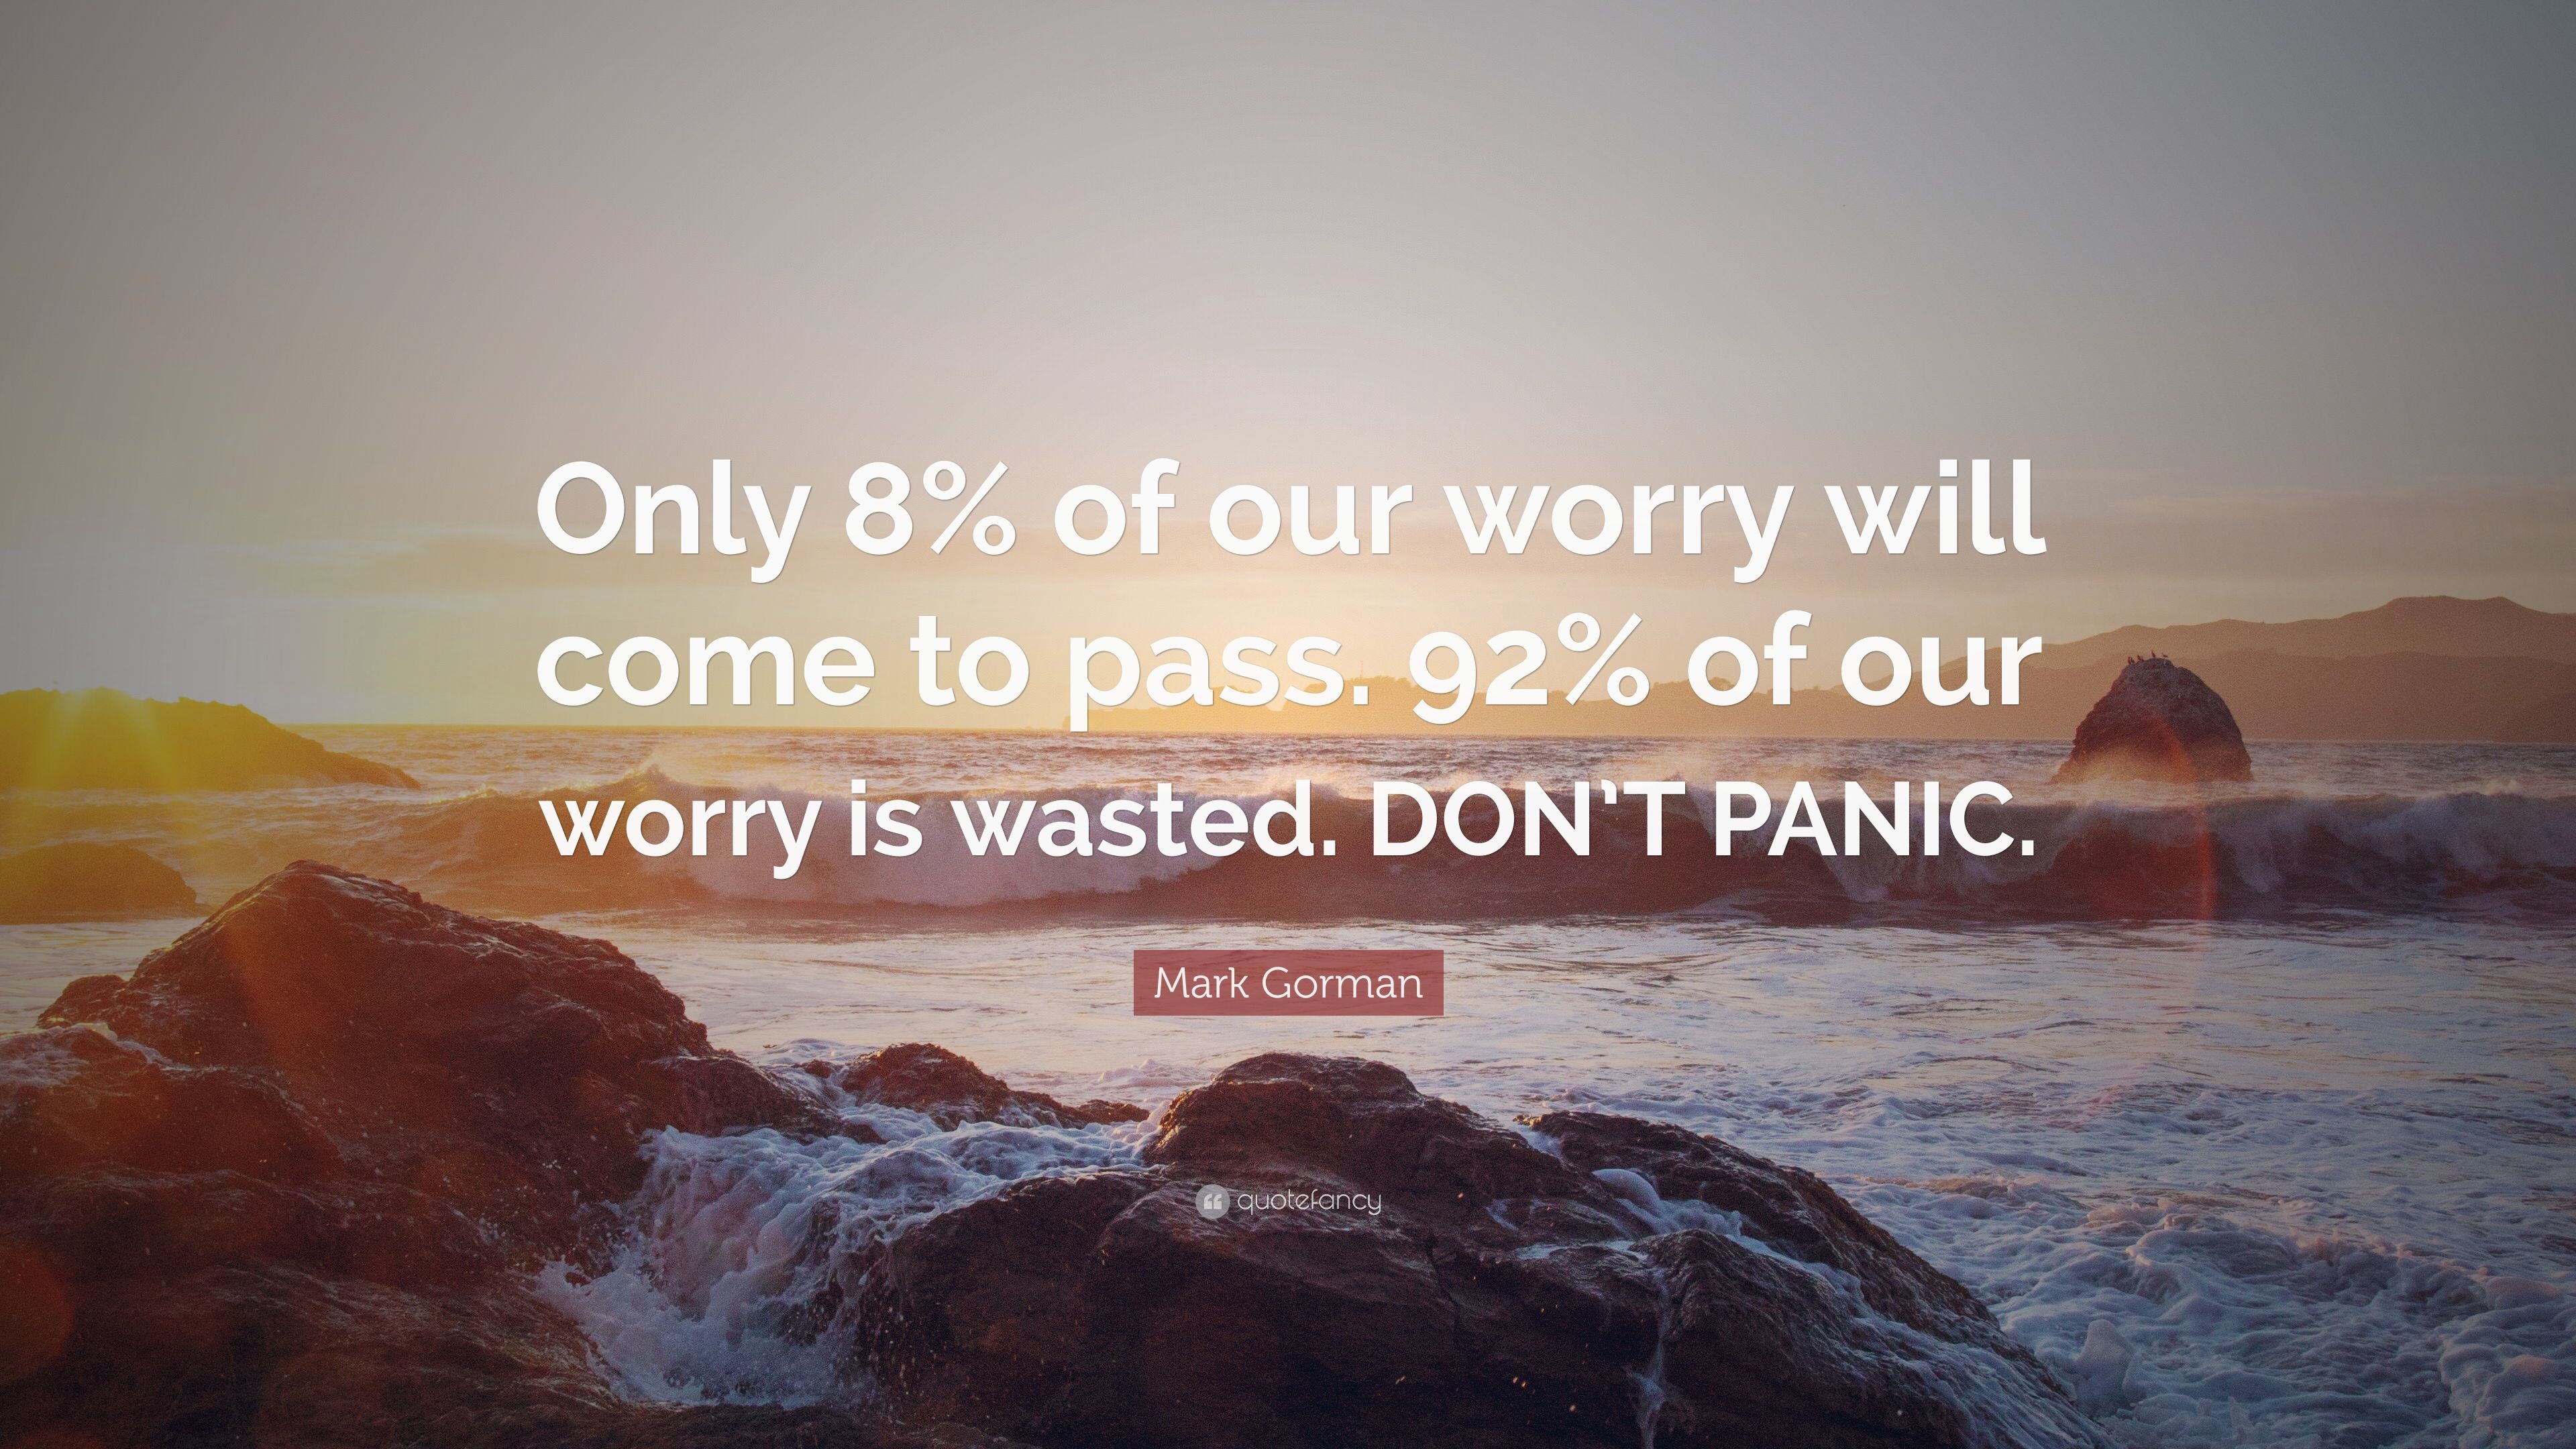 3840x2160 Mark Gorman Quote: “Only 8% of our worry will come to pass.